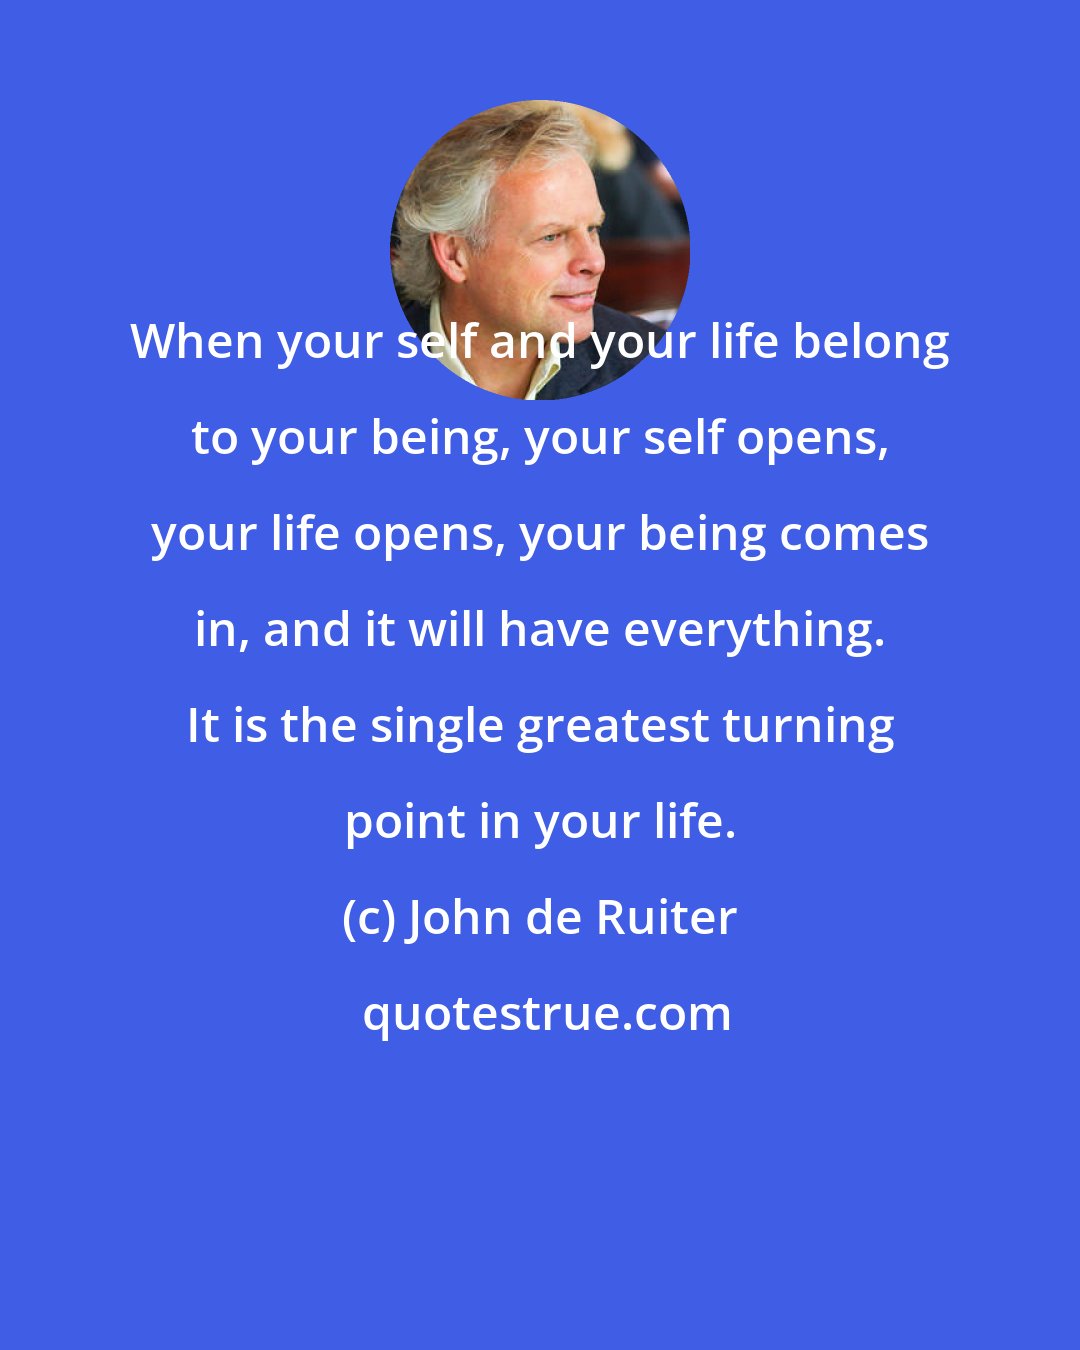 John de Ruiter: When your self and your life belong to your being, your self opens, your life opens, your being comes in, and it will have everything. It is the single greatest turning point in your life.